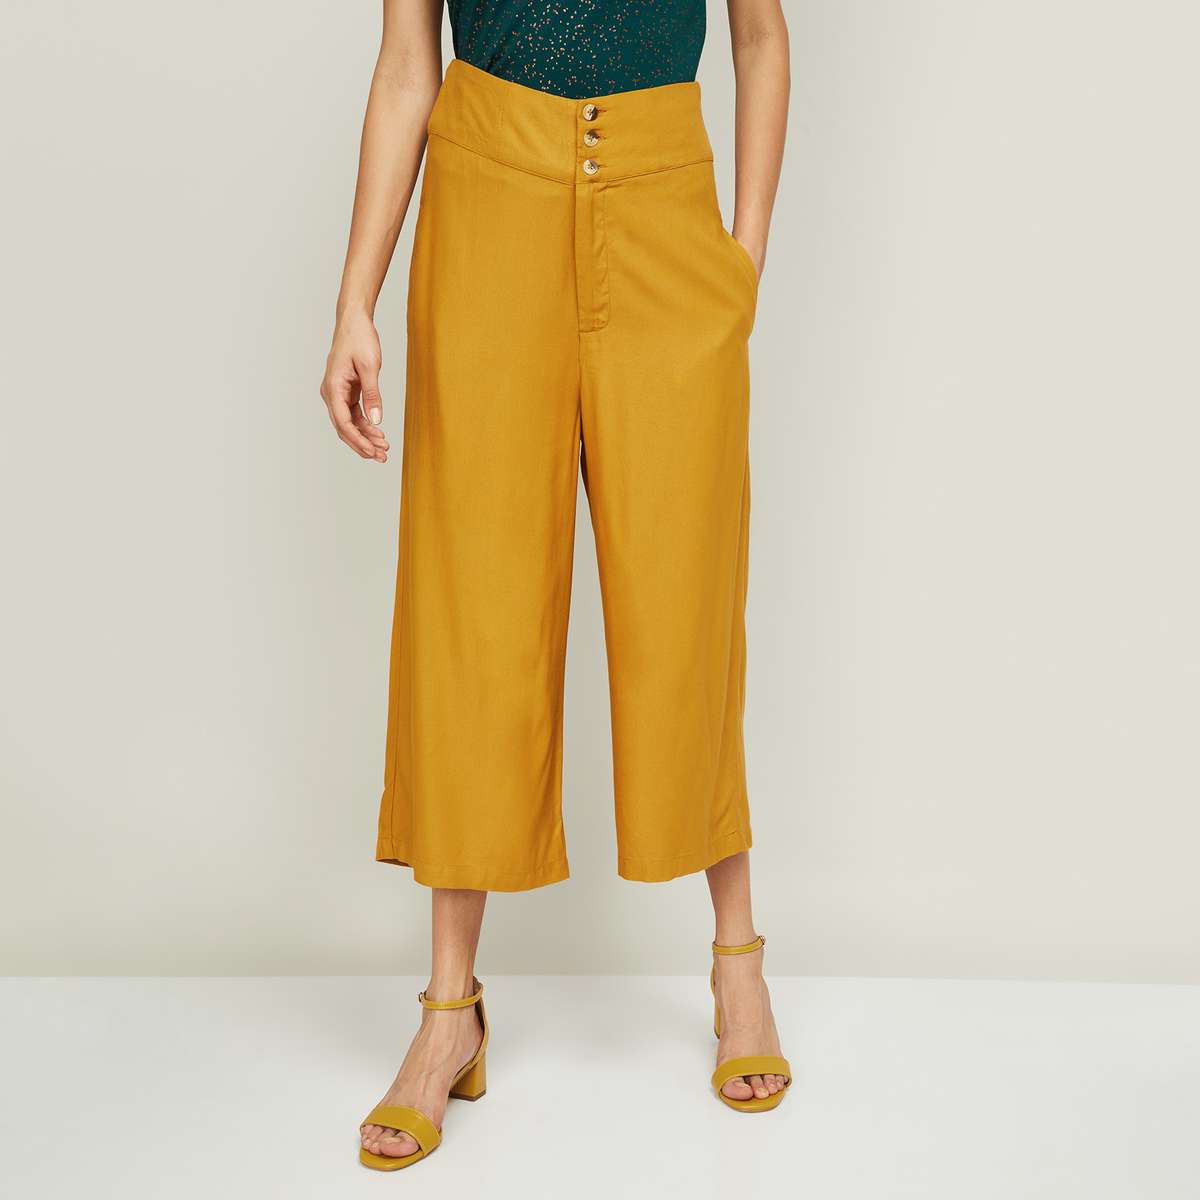 3.GINGER Women Solid Culottes with Pockets